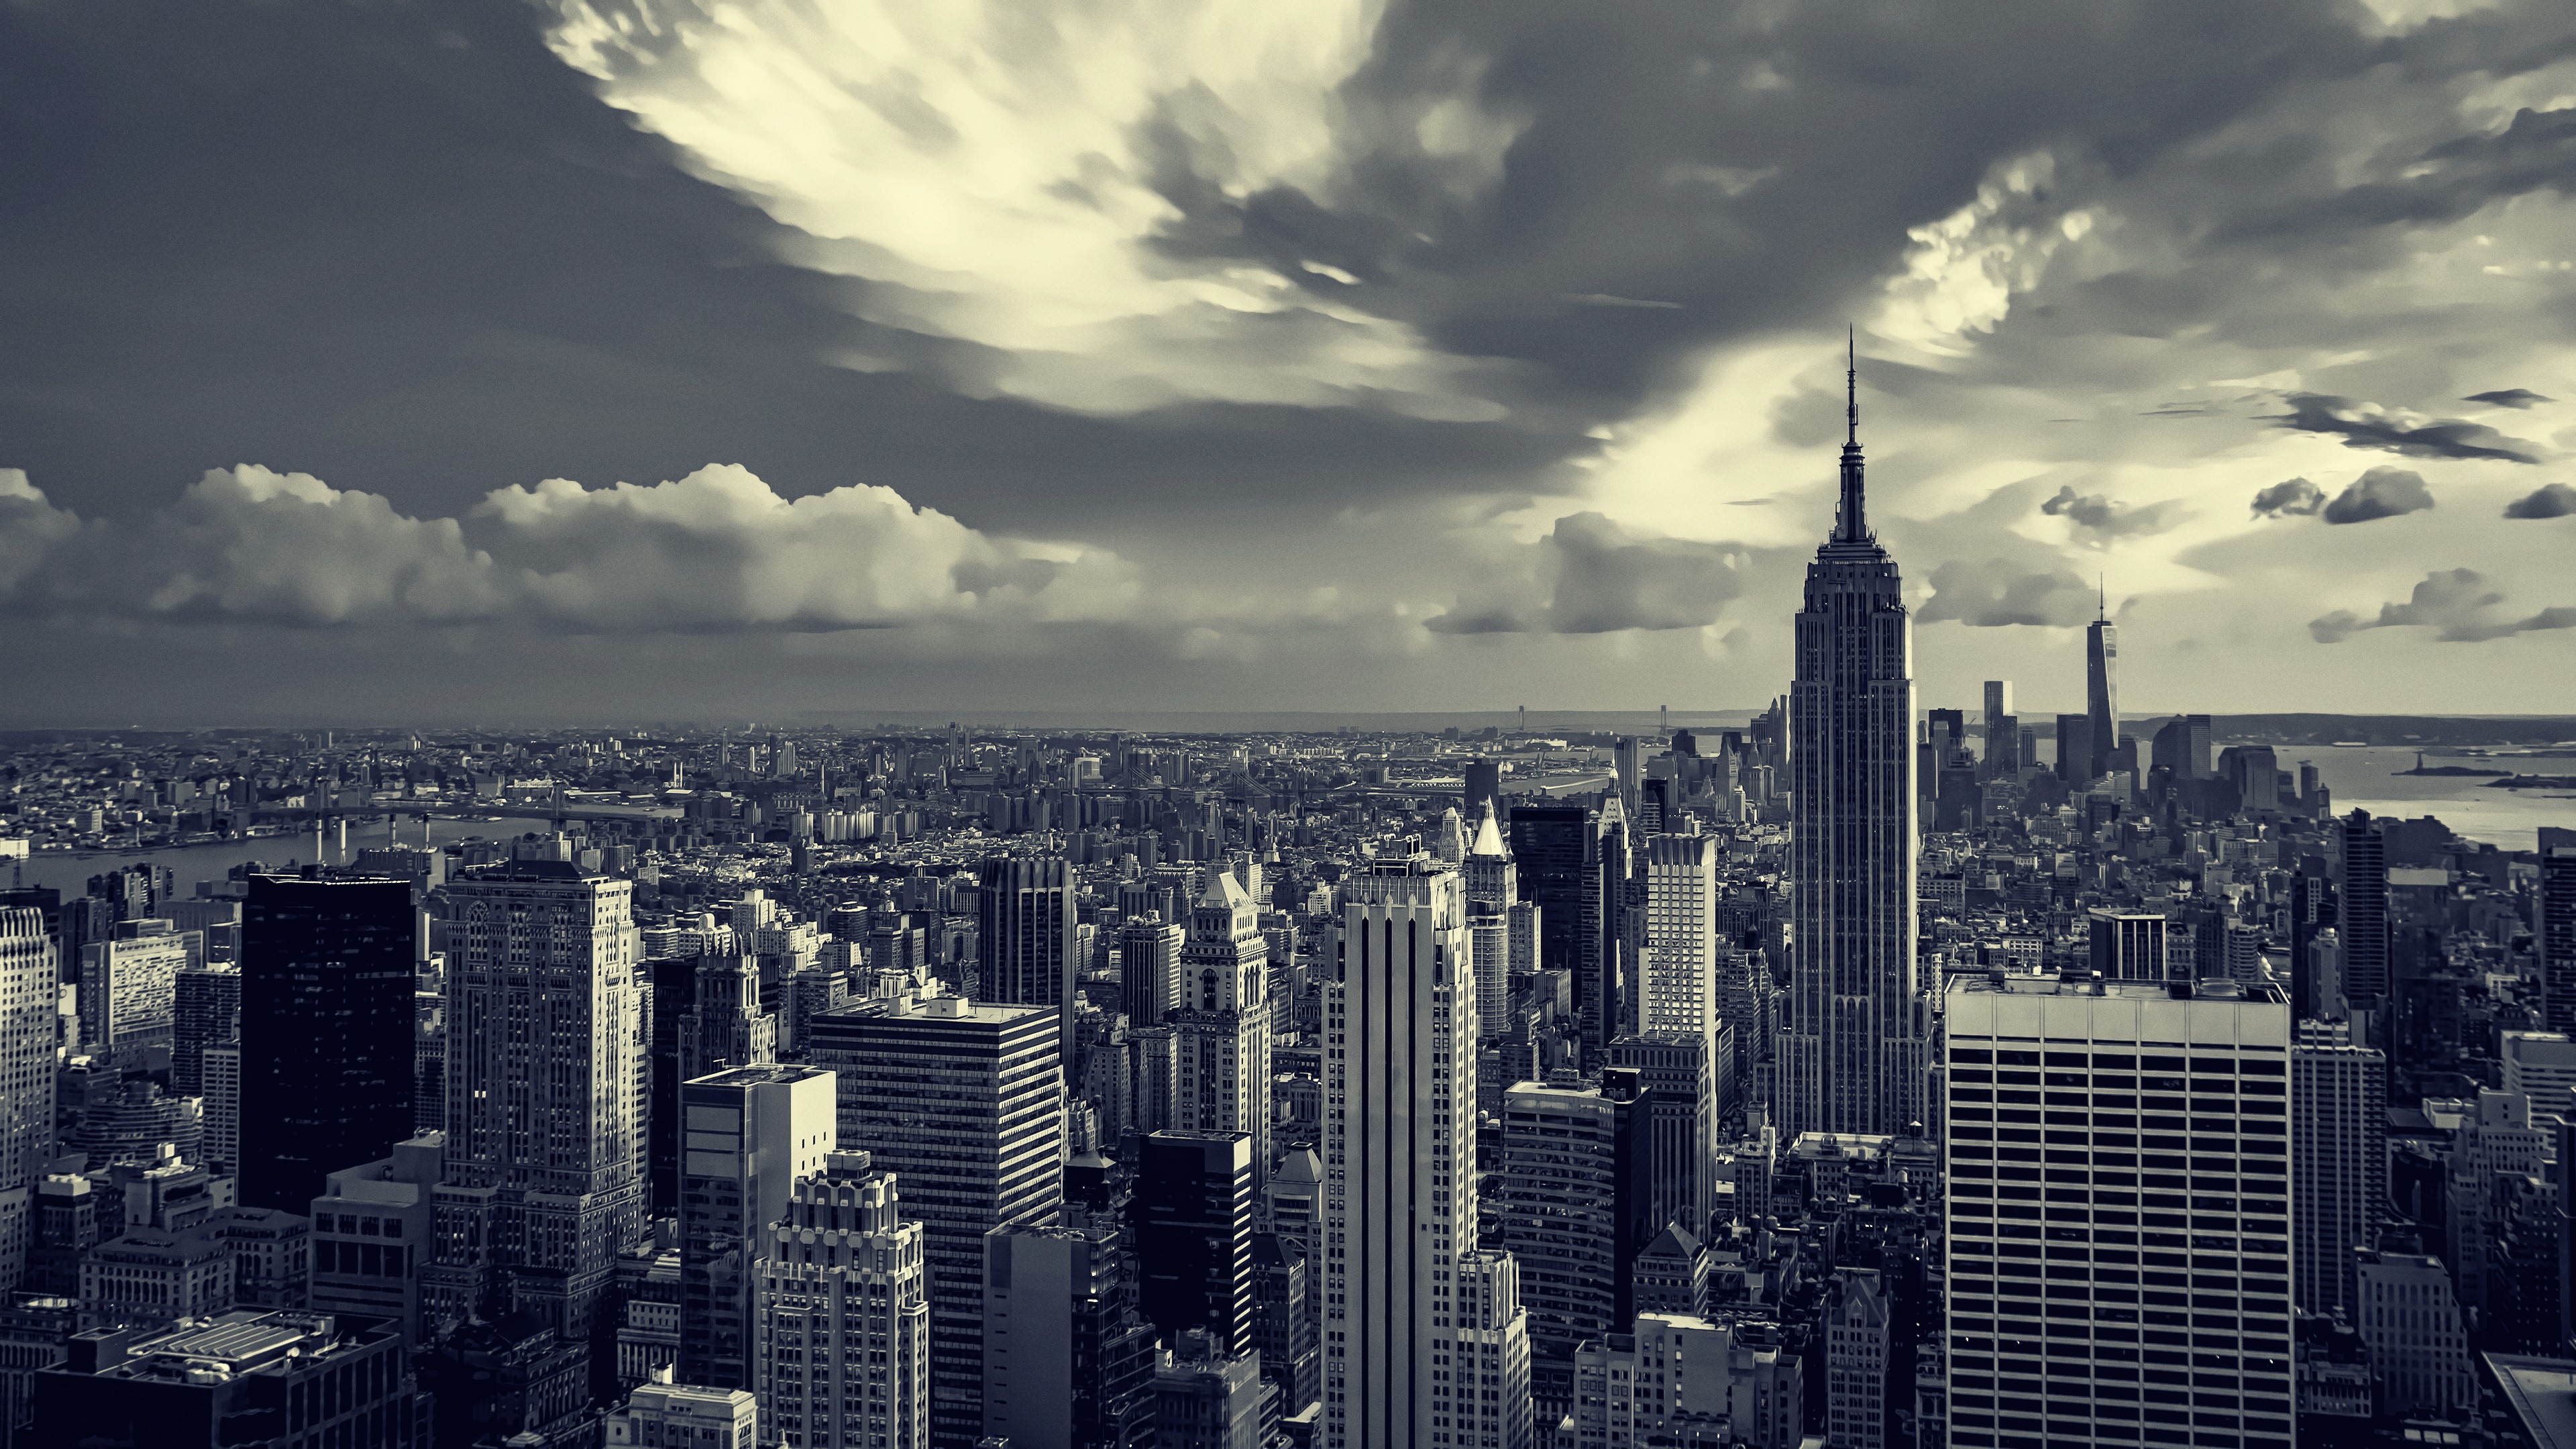 General 3840x2160 New York City cityscape clouds monochrome USA aerial view